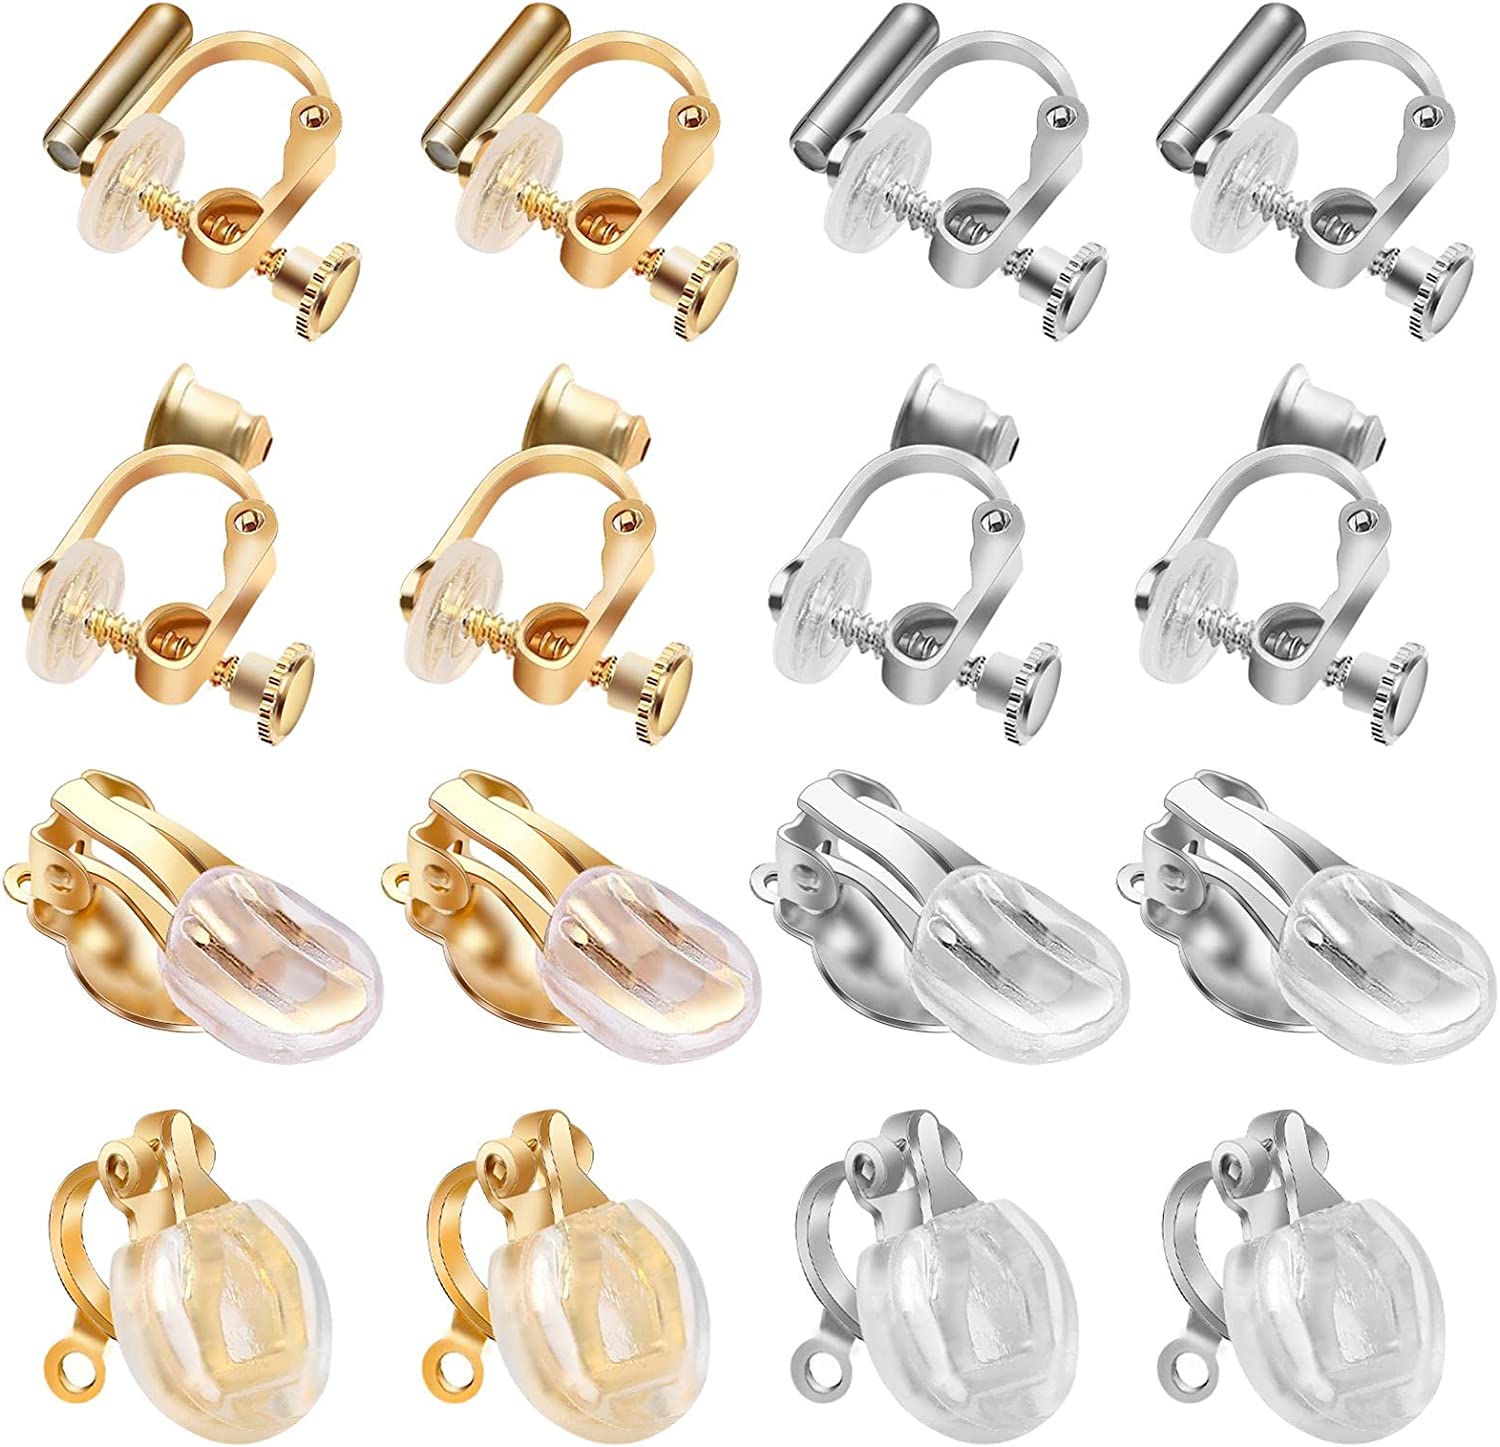 16 Pcs Clip on Earring Converter with Silicon Earring Pads, Gold Silver Round Flat Back Tray Earring Clip, and Converter Components with Post for DIY Earring Making for Women Men None Pierced Ears - image 1 of 5